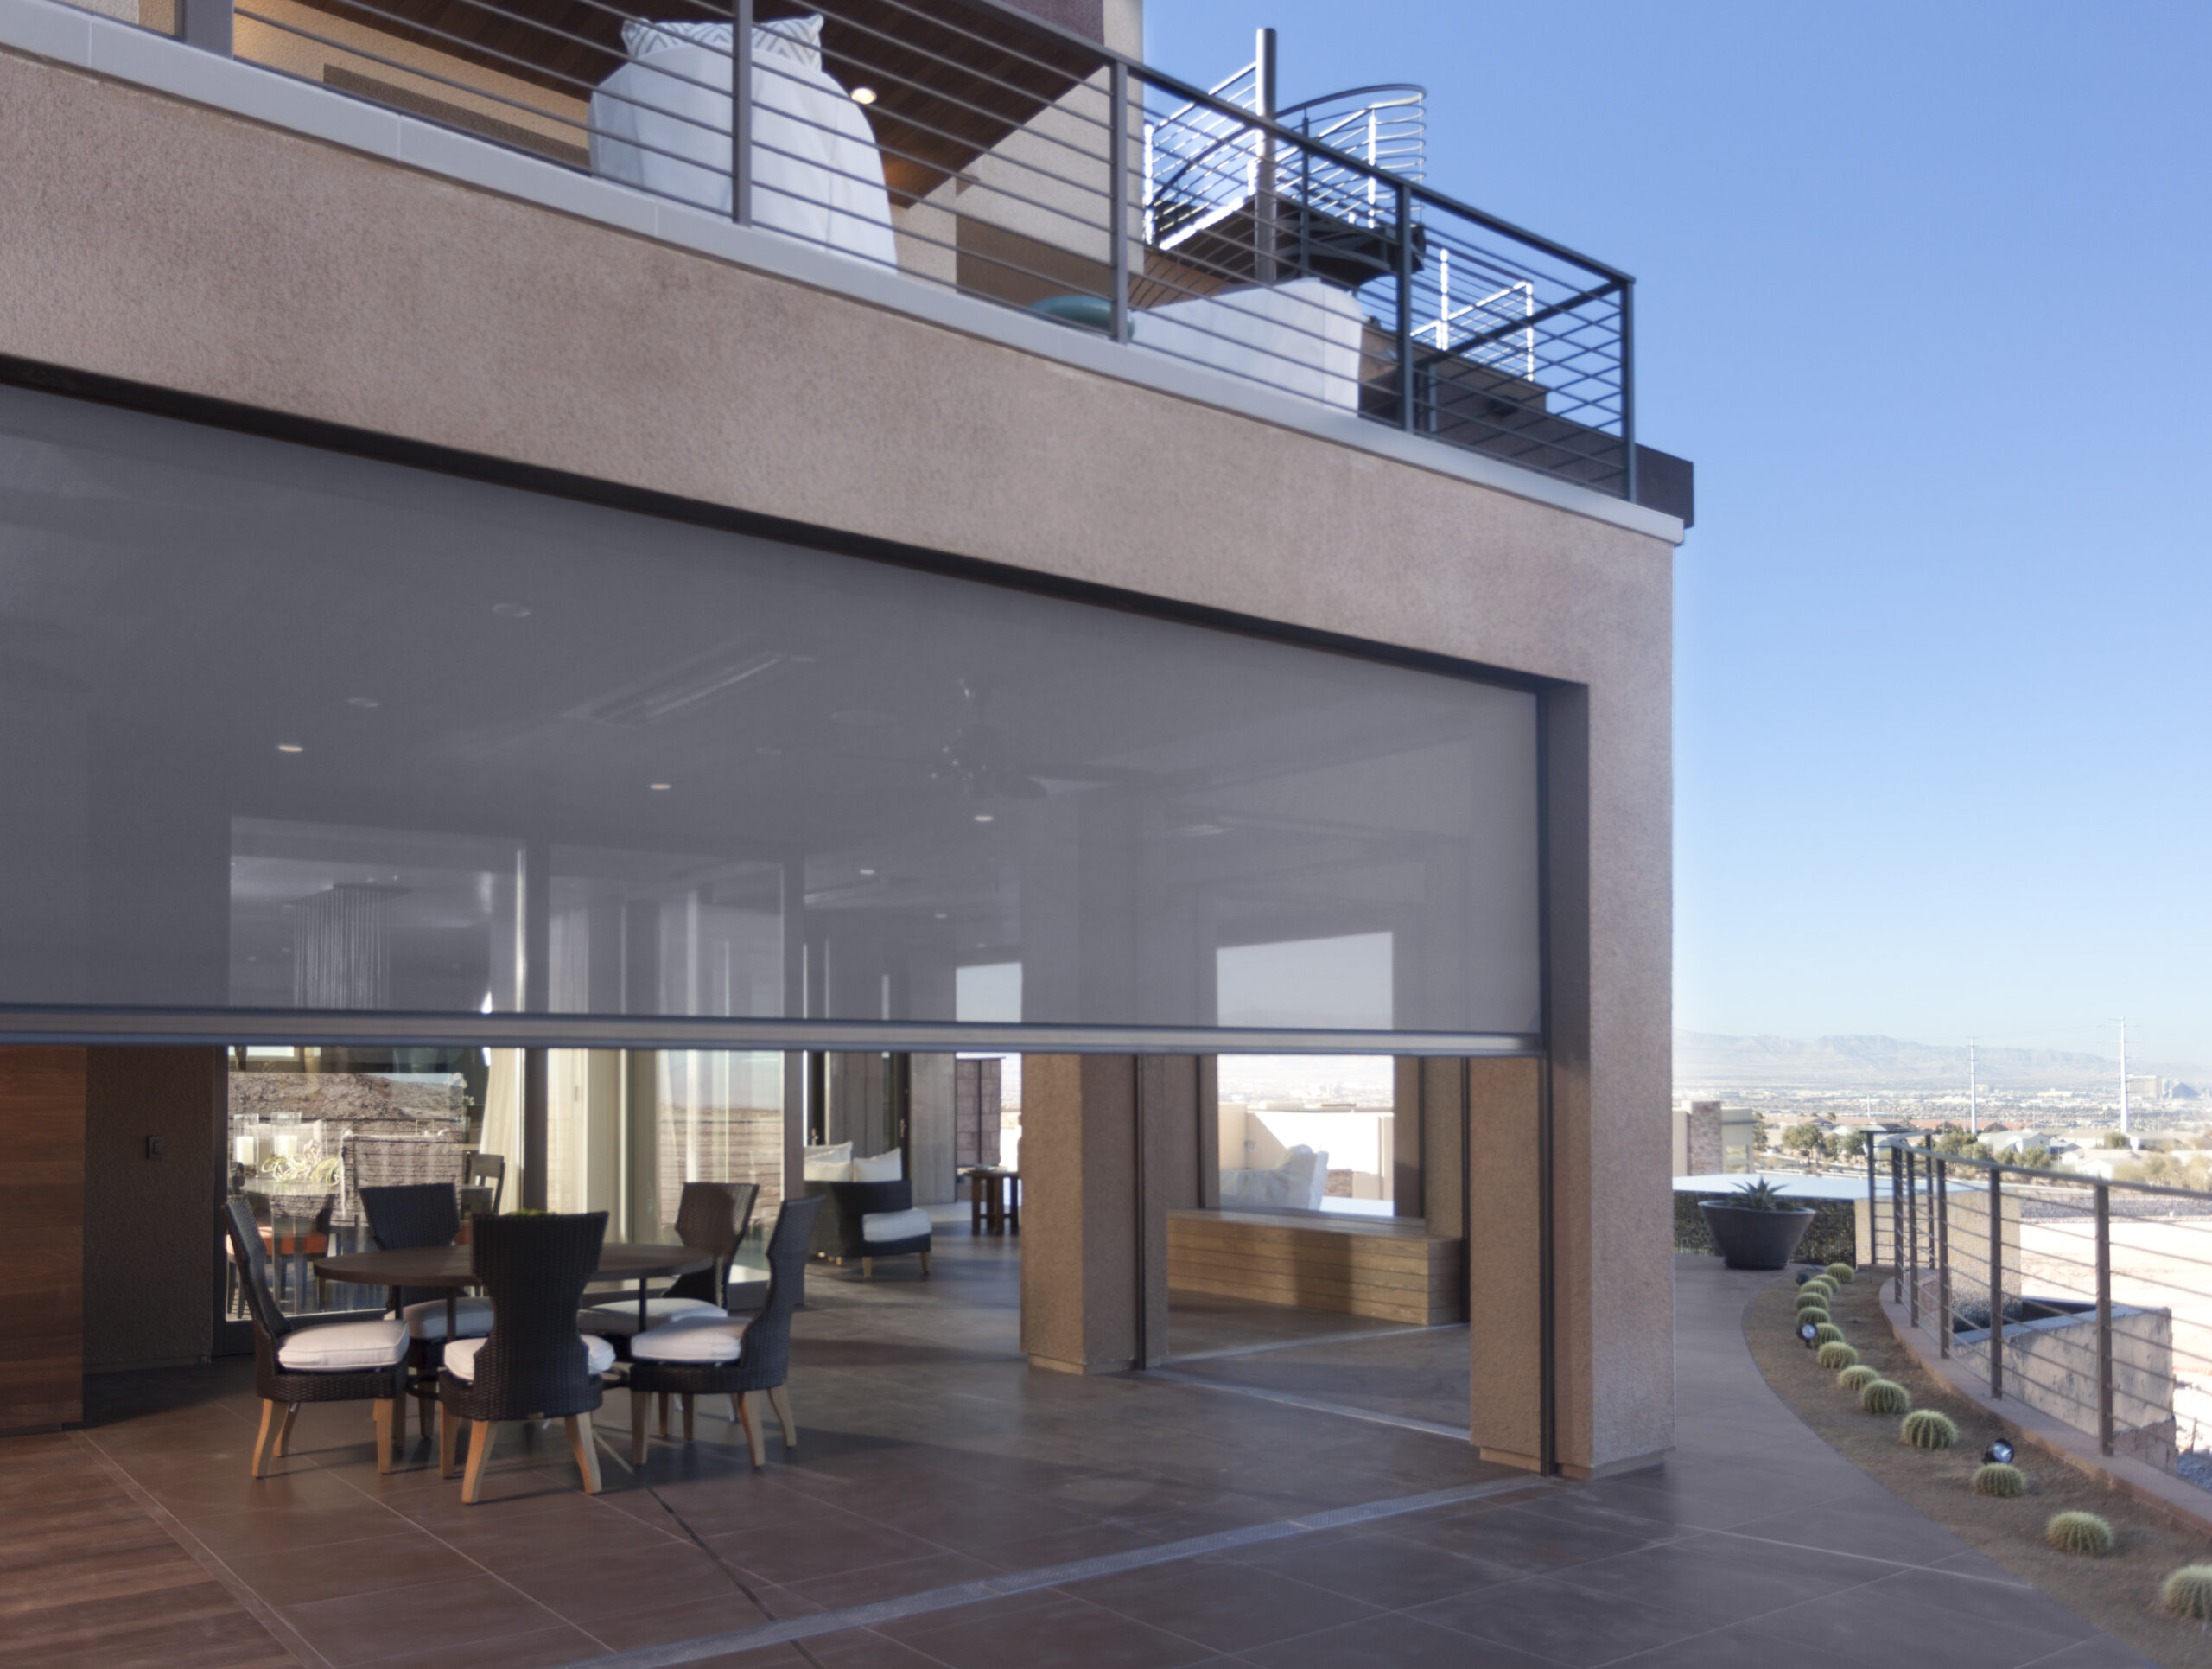 Phantom motorized retractable screens installed on a balcony of a gorgeous home